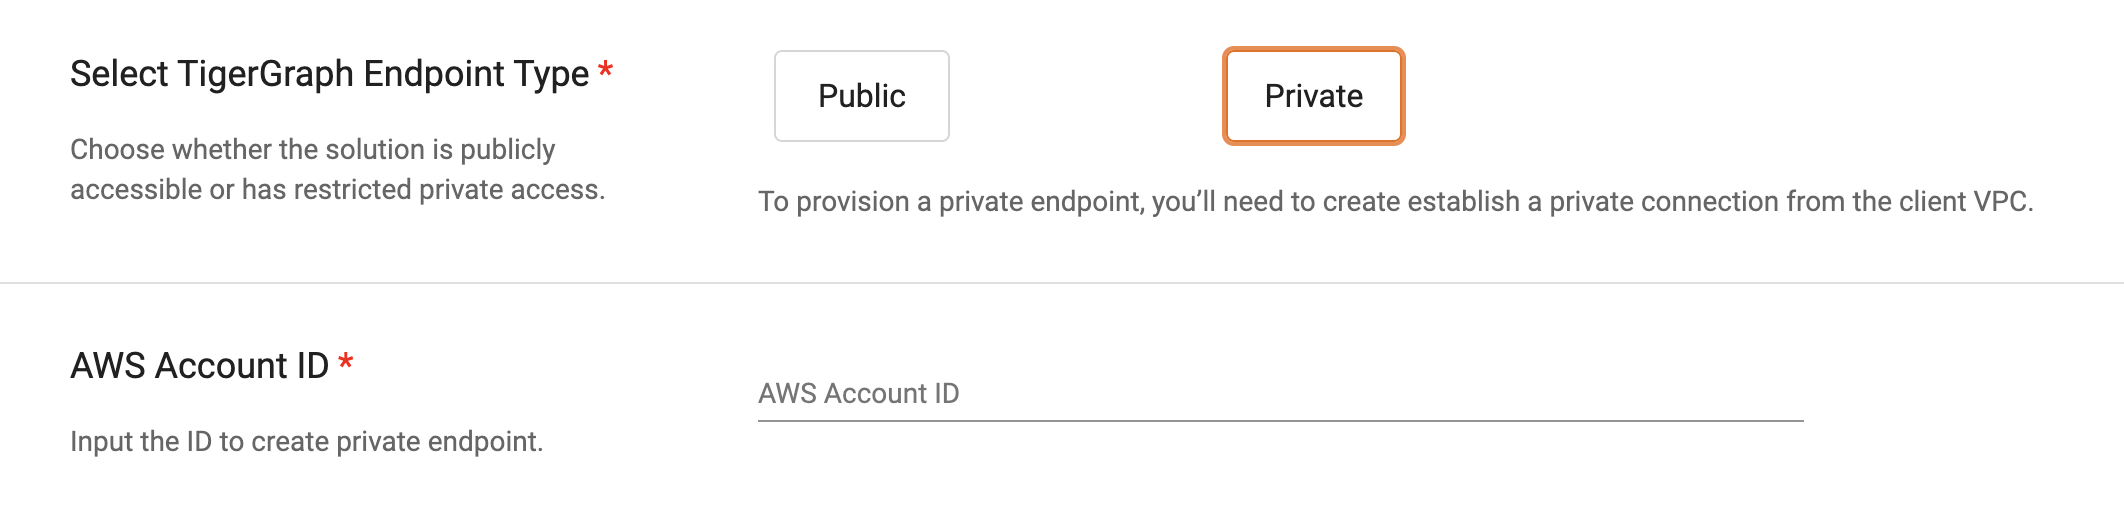 enable private access aws